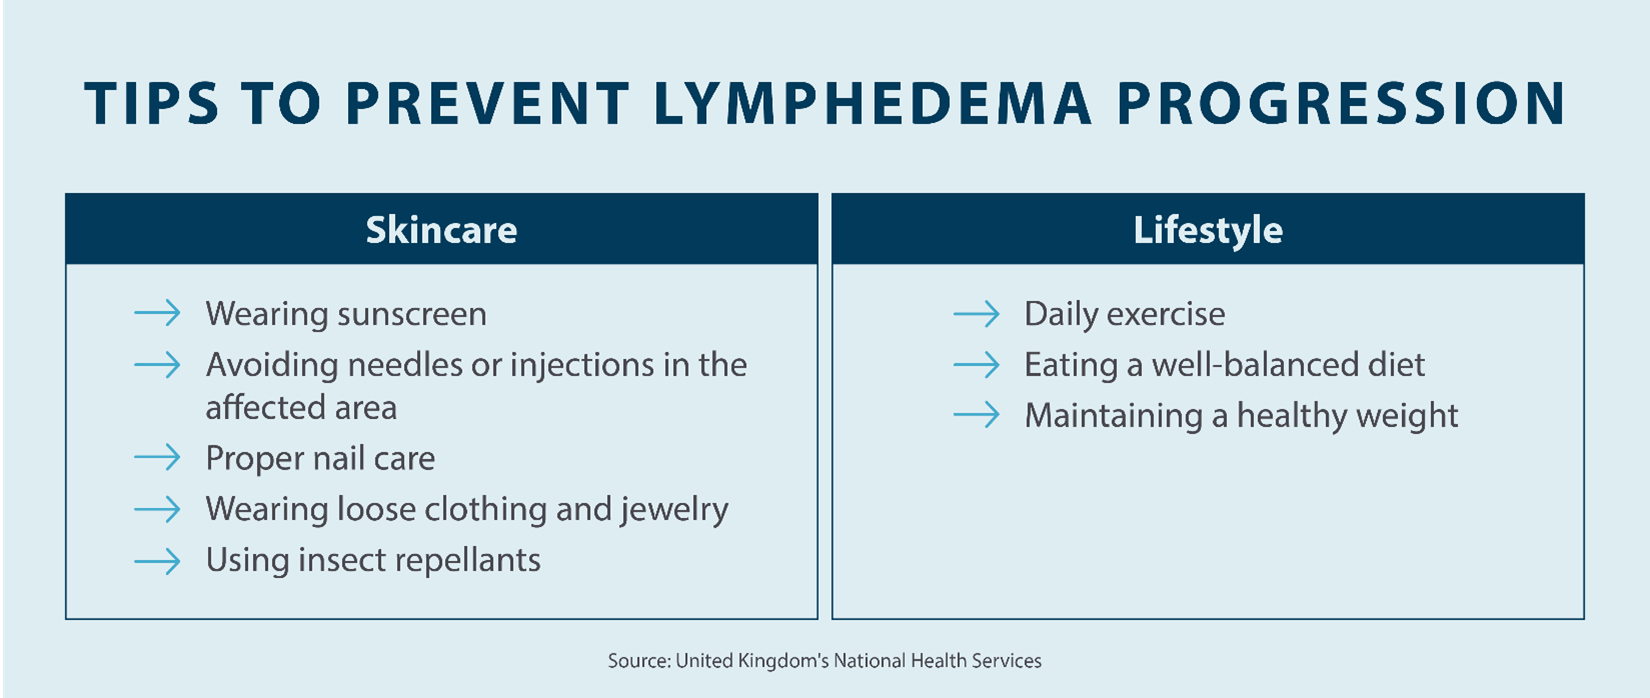 image showing tips to prevent lymphedema progression